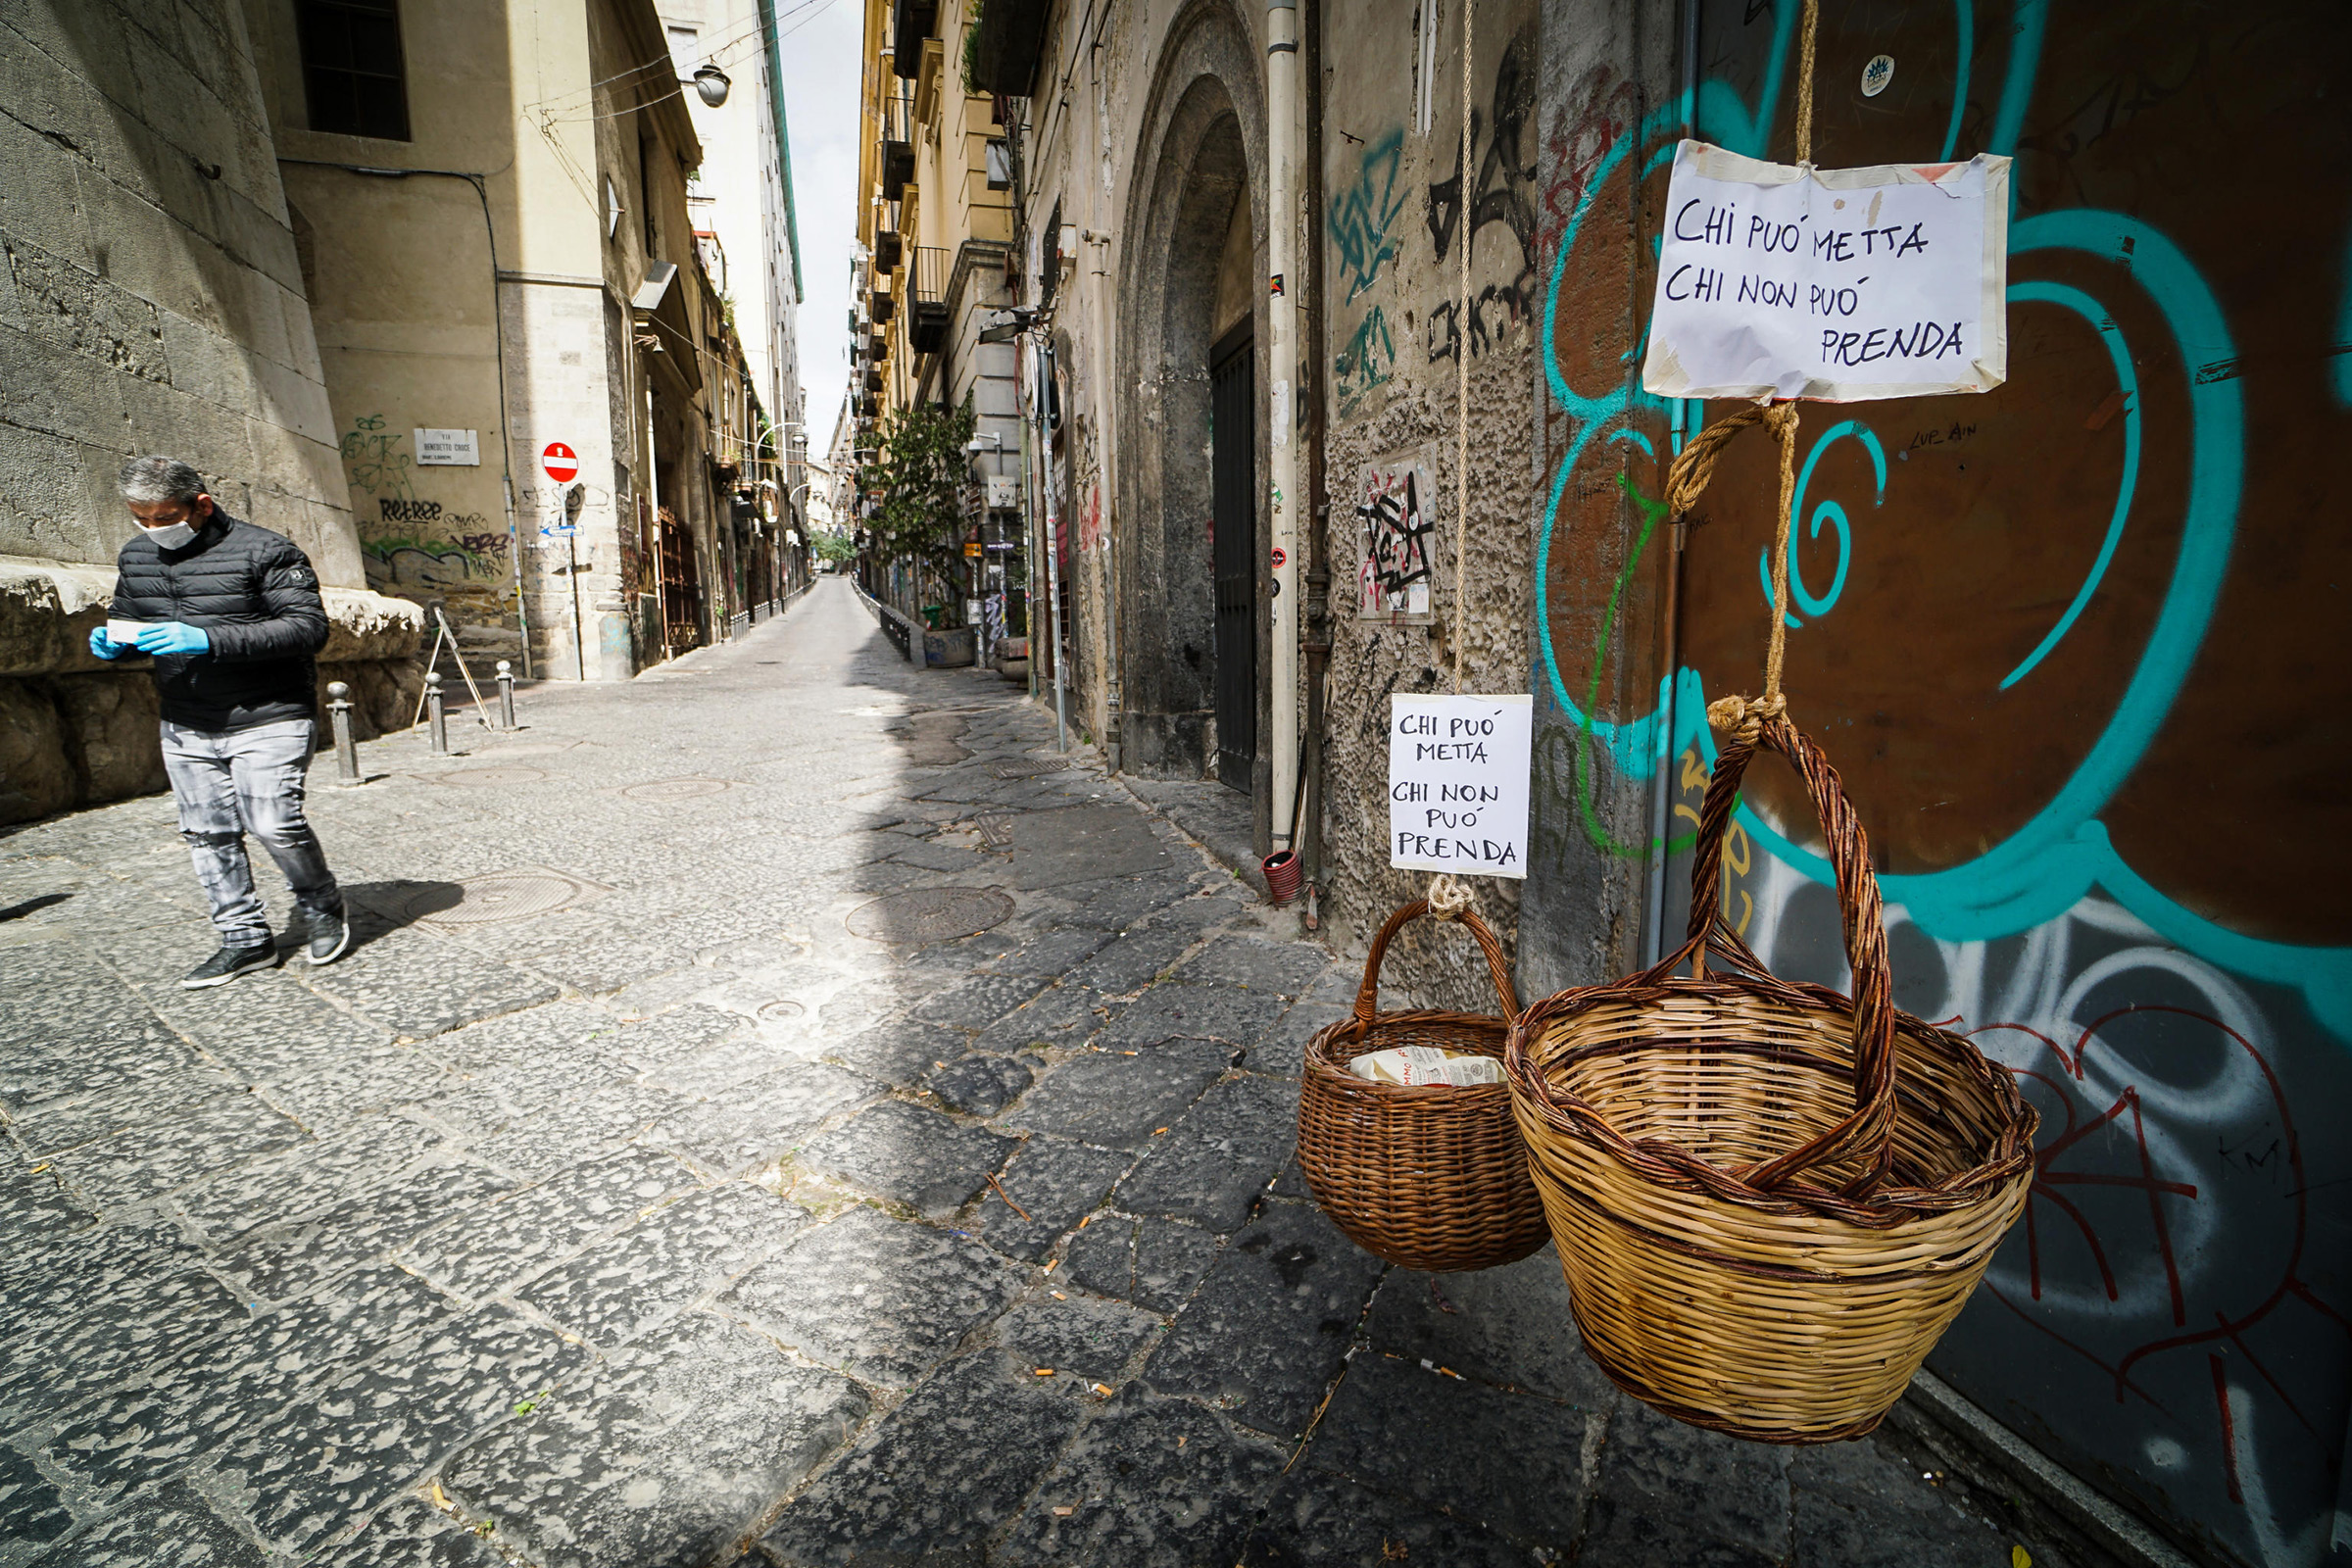 Solidarity baskets with notes reading 'Who can may put, who cannot may take' in one of the deserted streets in the historic center of Naples, southern Italy, on March 30, 2020. (Cesare Abbate—EPA-EFE/Shutterstock)